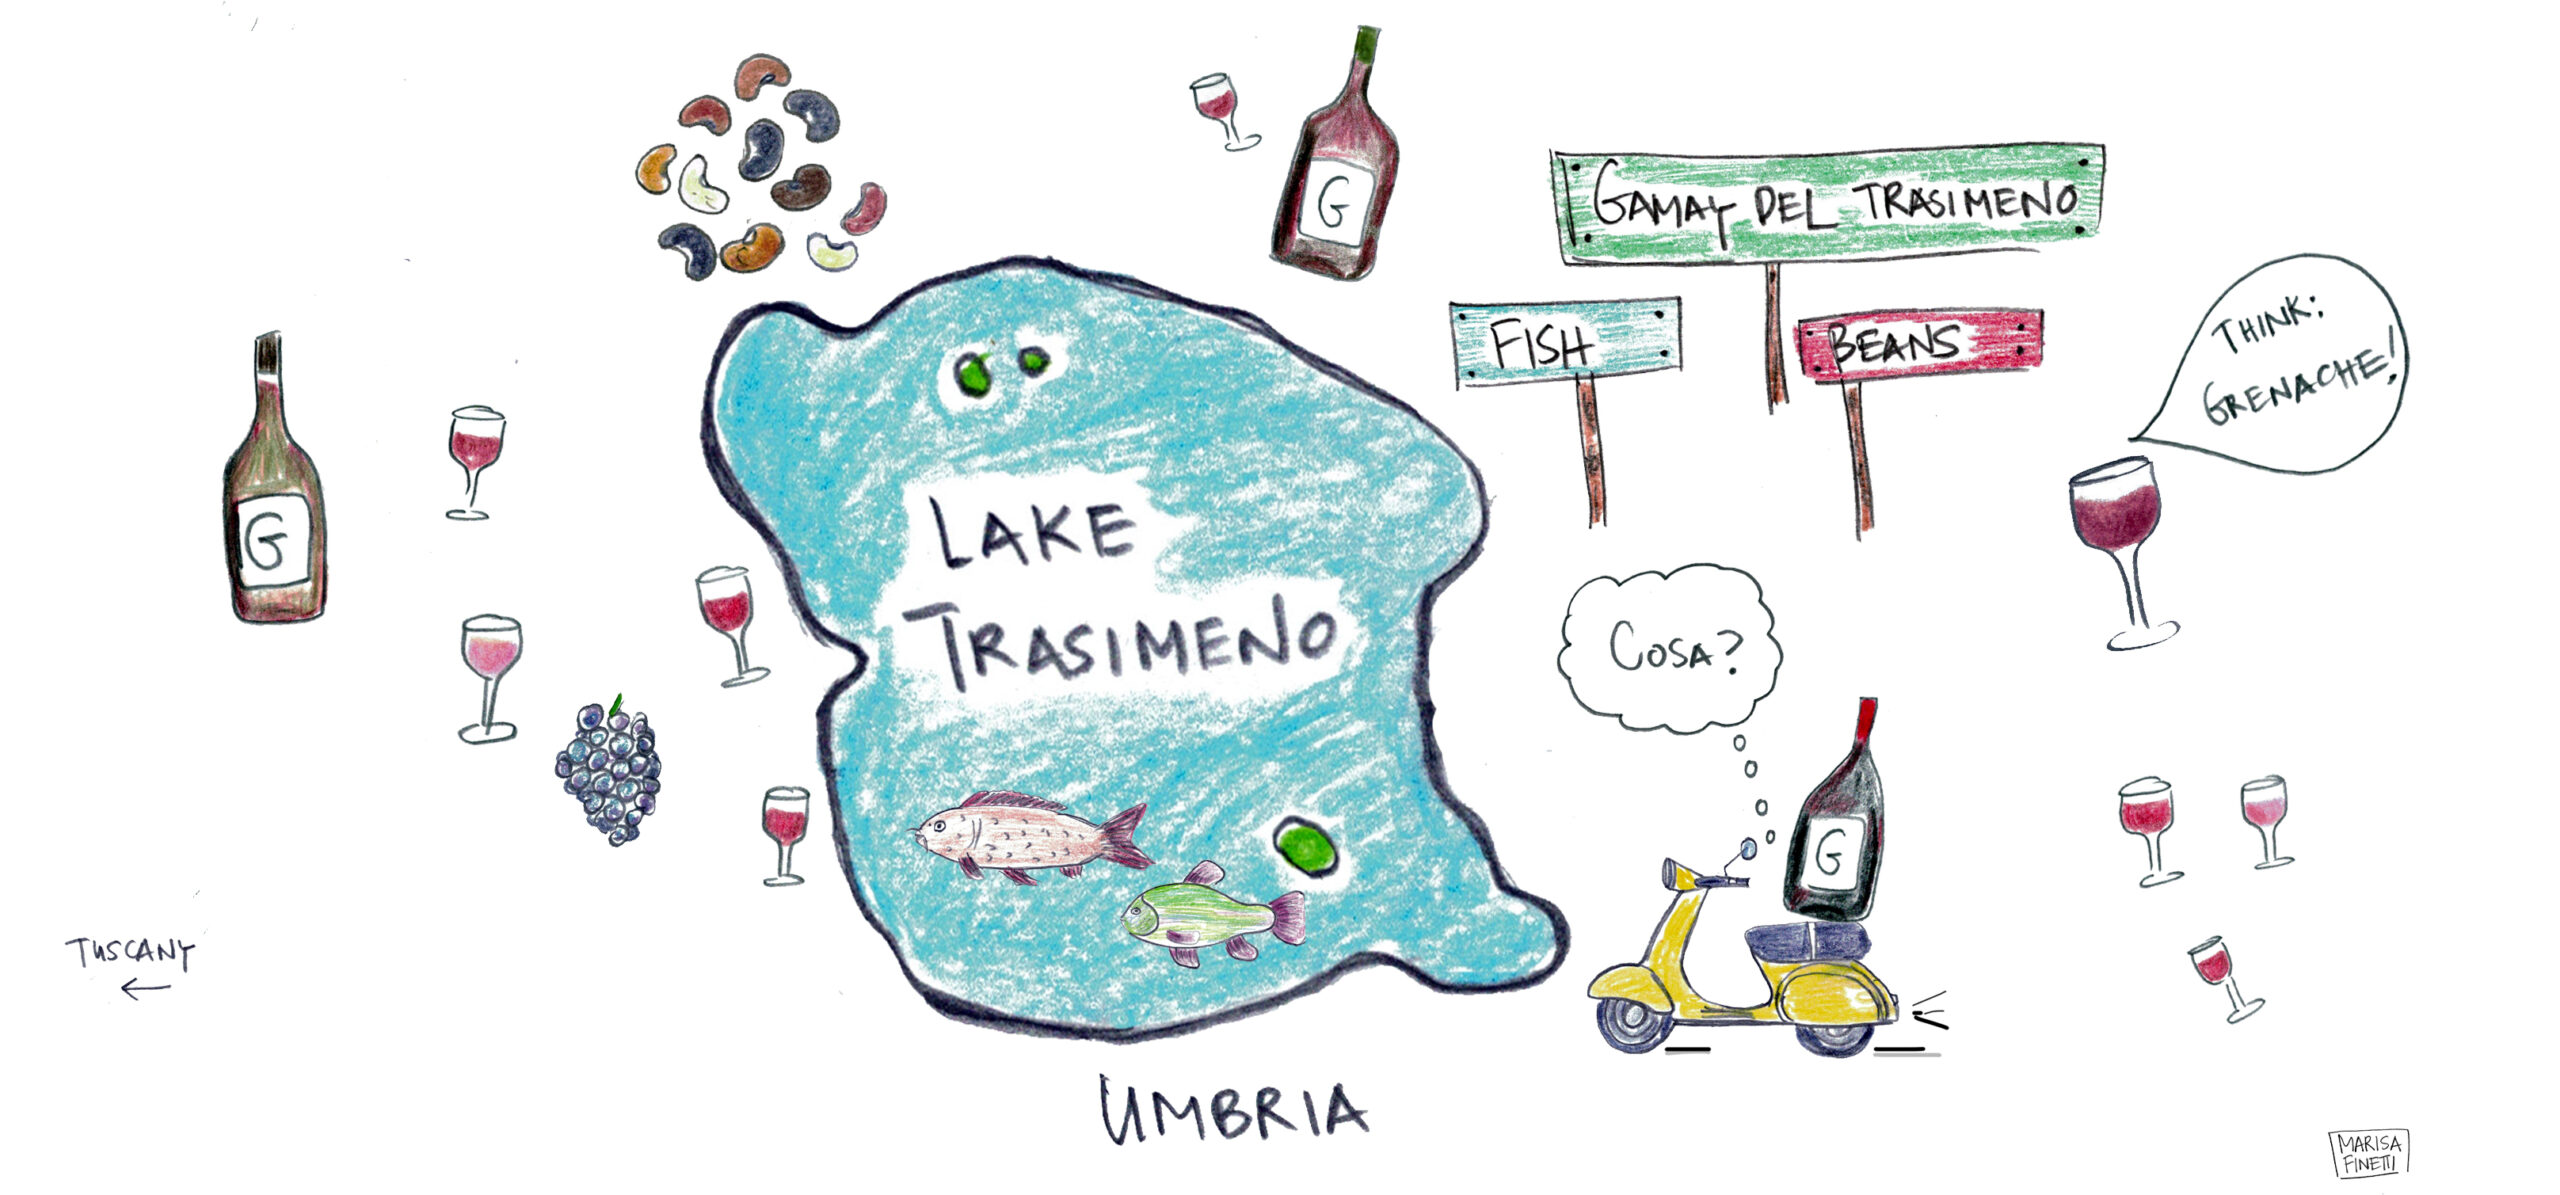 Lake fish, beans, and Umbria’s other red wine